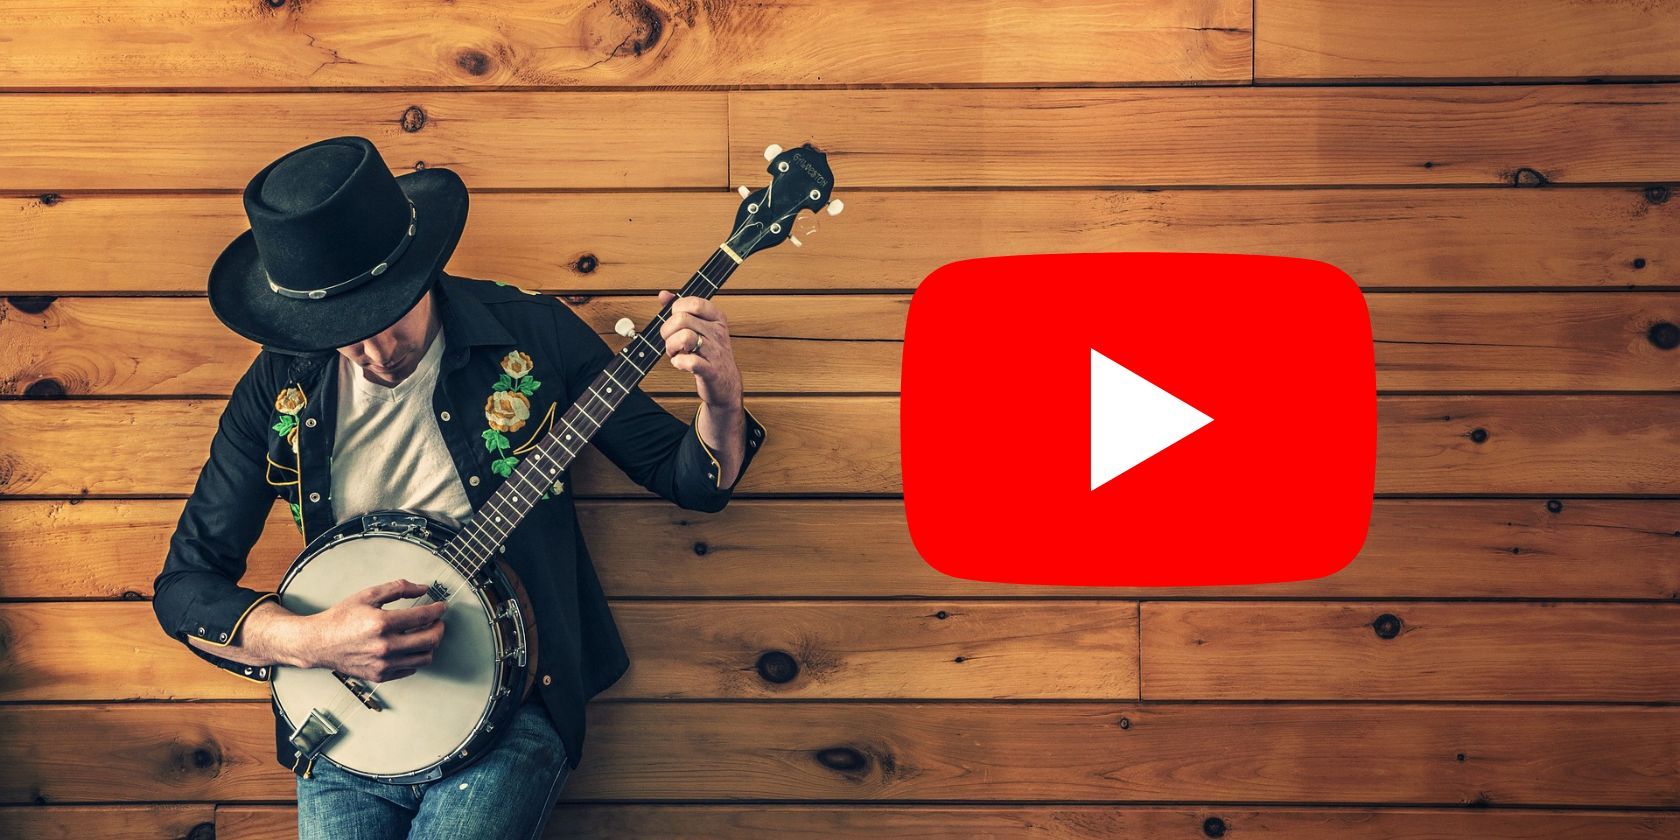 The 10 Best YouTube Channels for Music Reviews